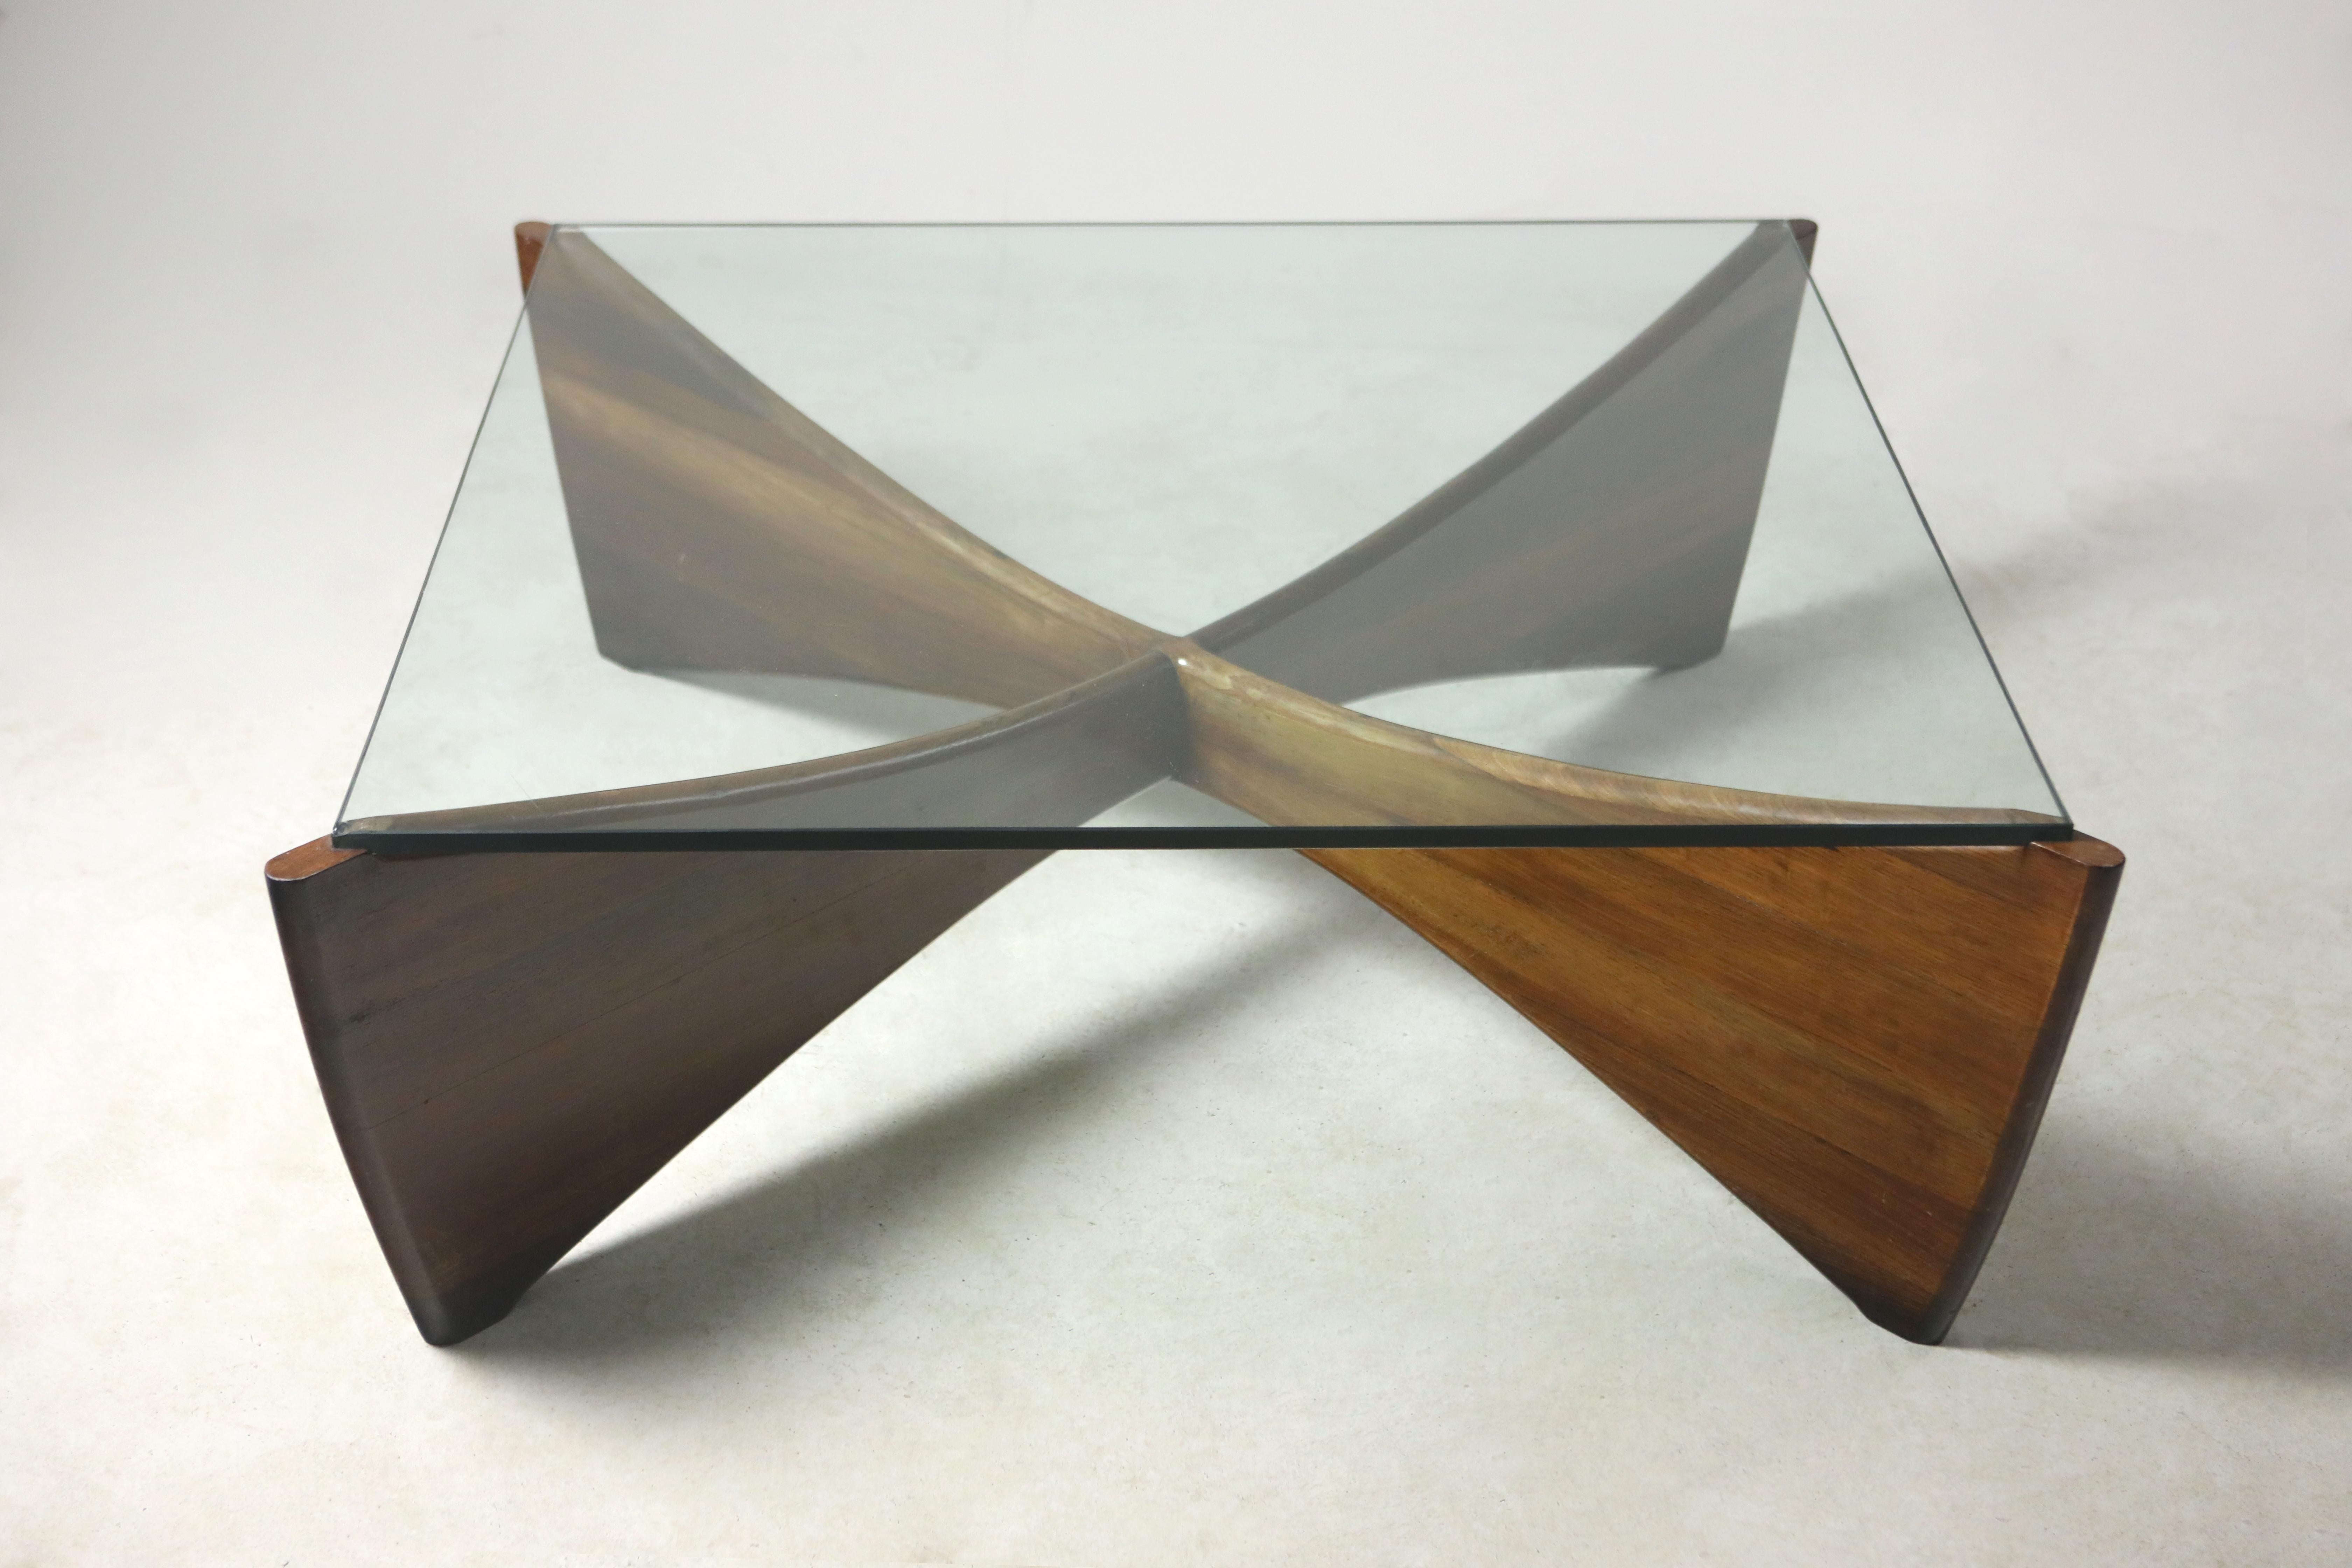 Mid-Century Modern Square Table by Mobília Contemporânea, Brazil, 1950s

This coffee table, manufactured by Mobilia Contemporânea, combines solid wood and glass in an impressive X-shaped design, and stands out for its differentiated look and